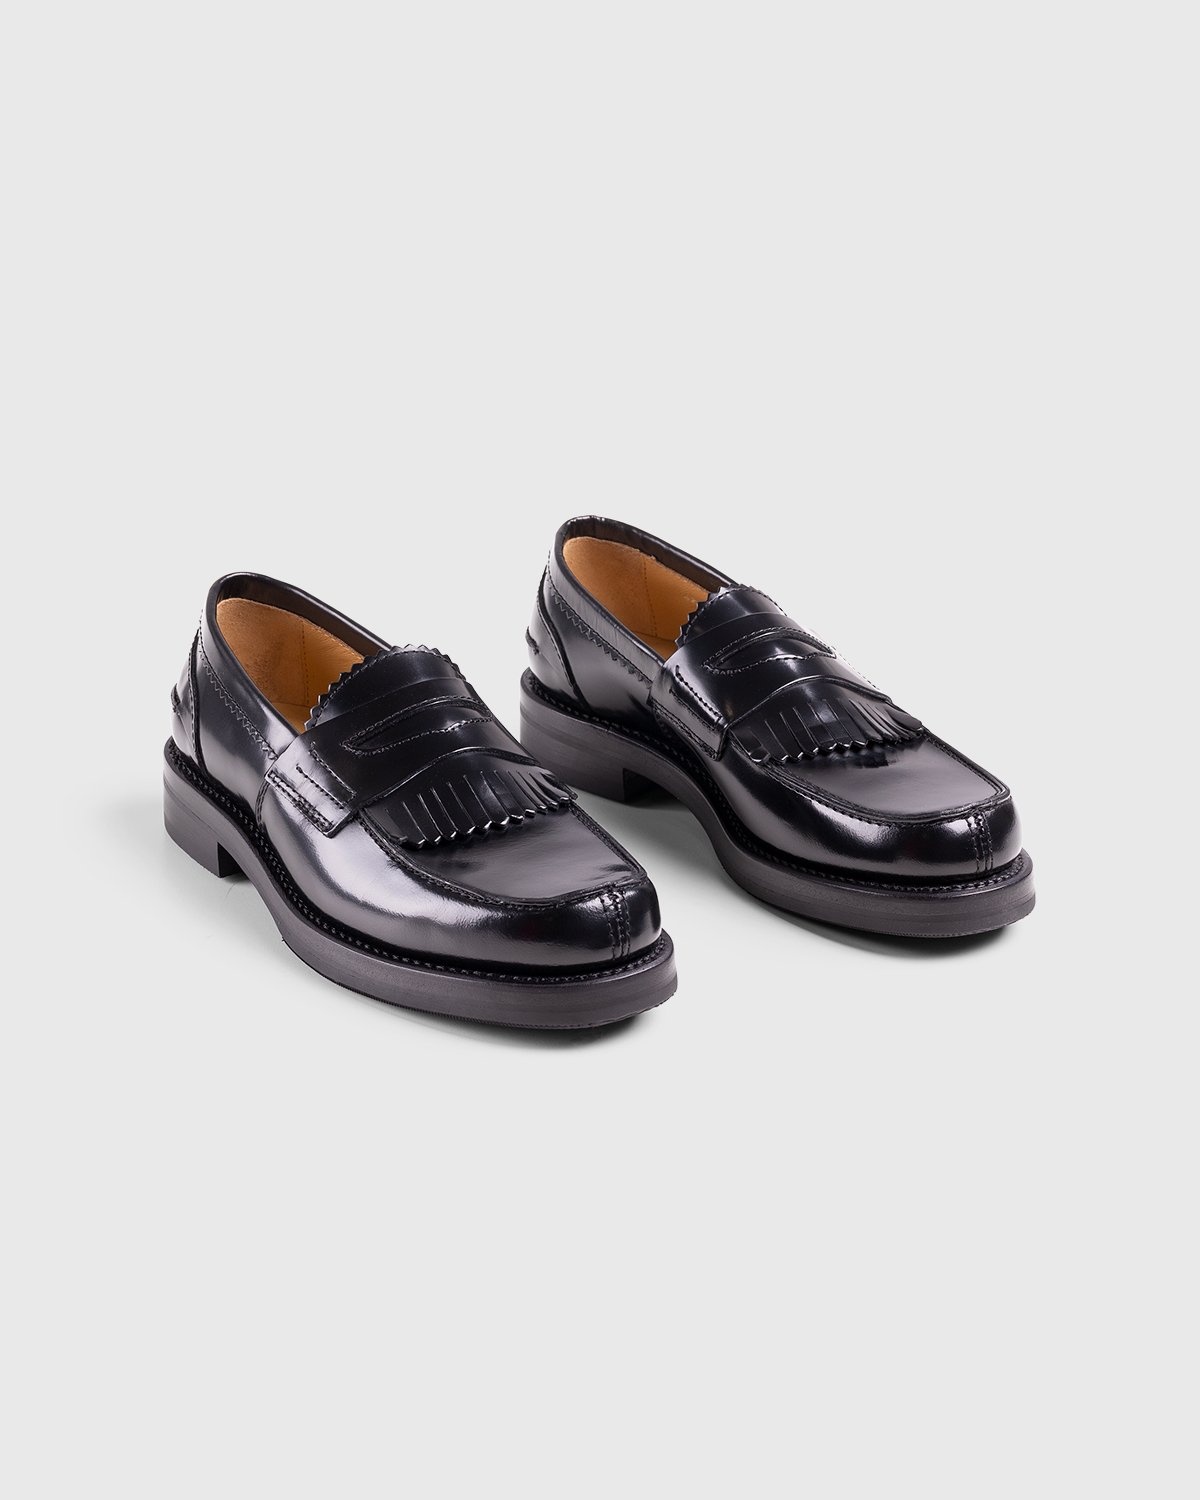 Our Legacy – Penny Loafer Black Leather - Loafers - Black - Image 3